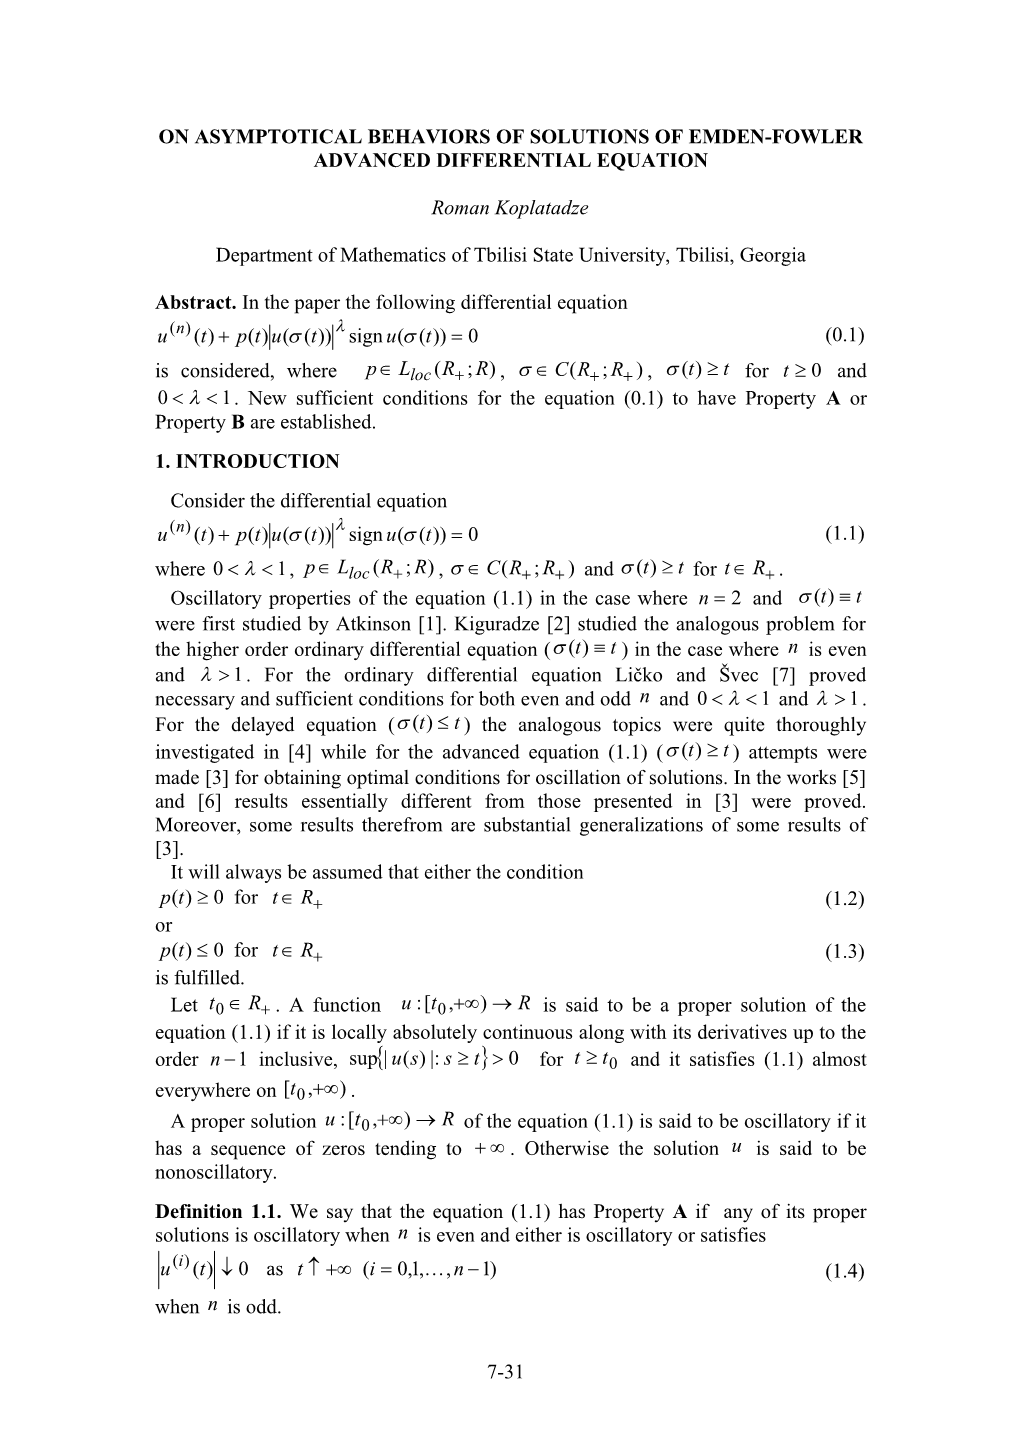 On Asymptotical Behaviors of Solutions of Emden-Fowler Advanced Differential Equation